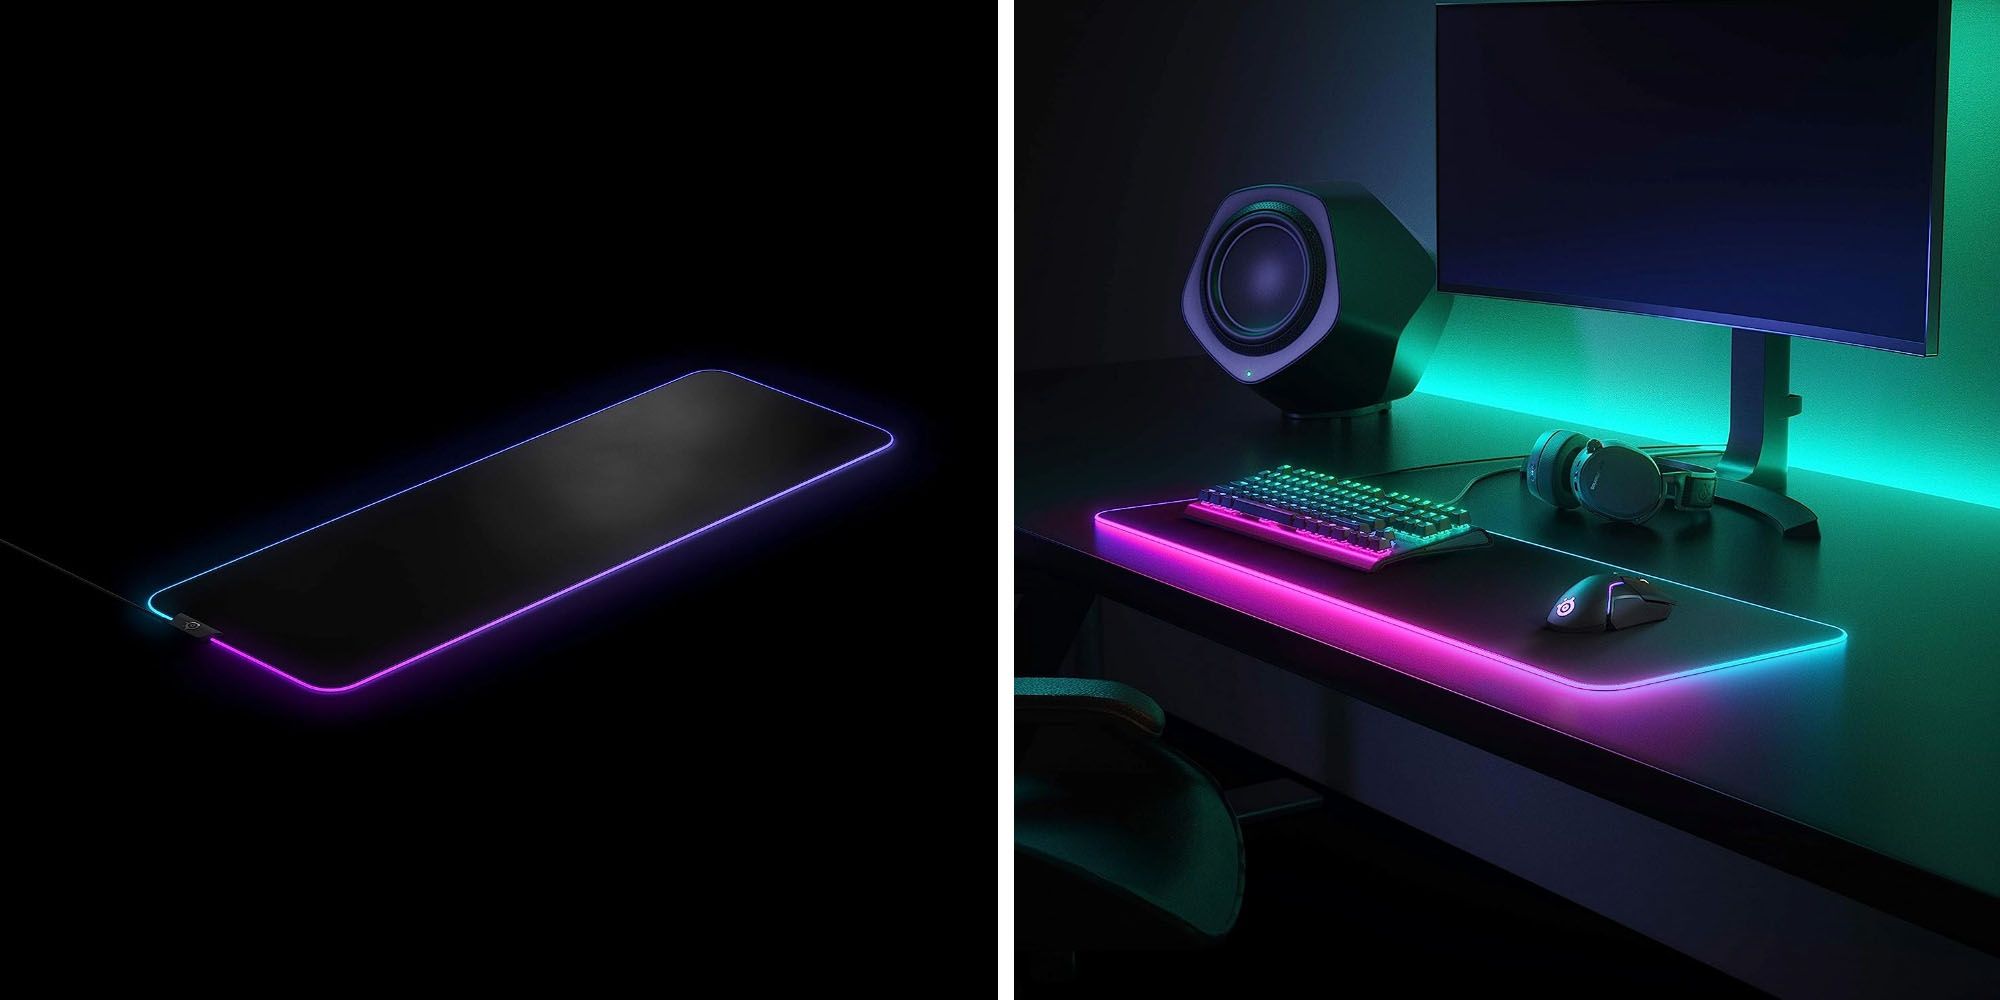 A split image featuring a large black gaming mouse pad with rainbow lighting around the perimeter.